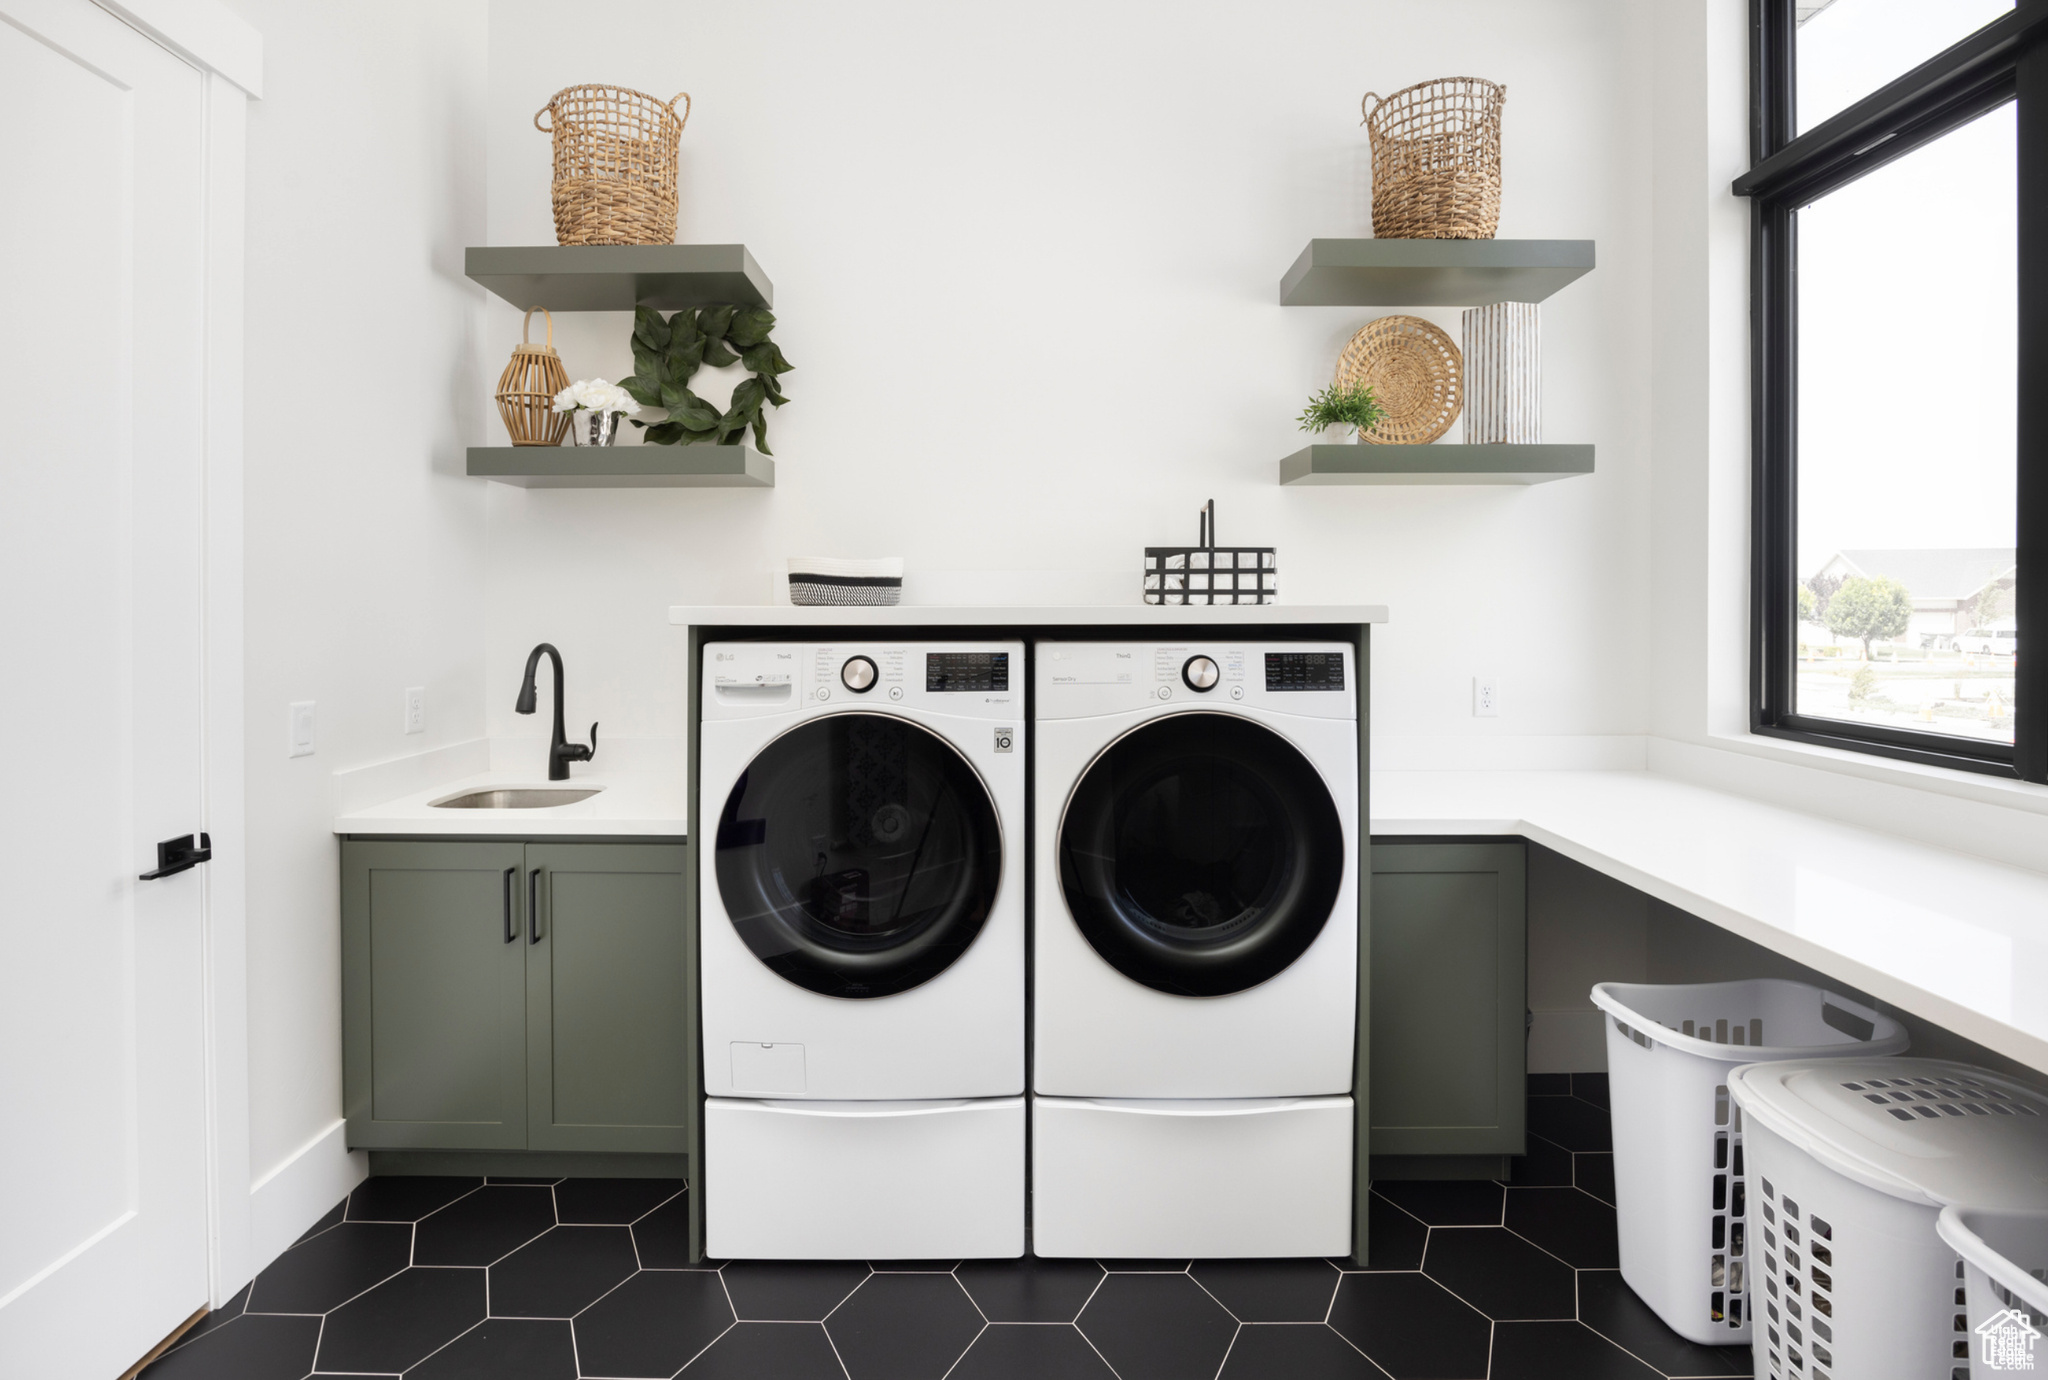 Laundry room featuring cabinets, sink, washing machine and dryer, and dark tile flooring